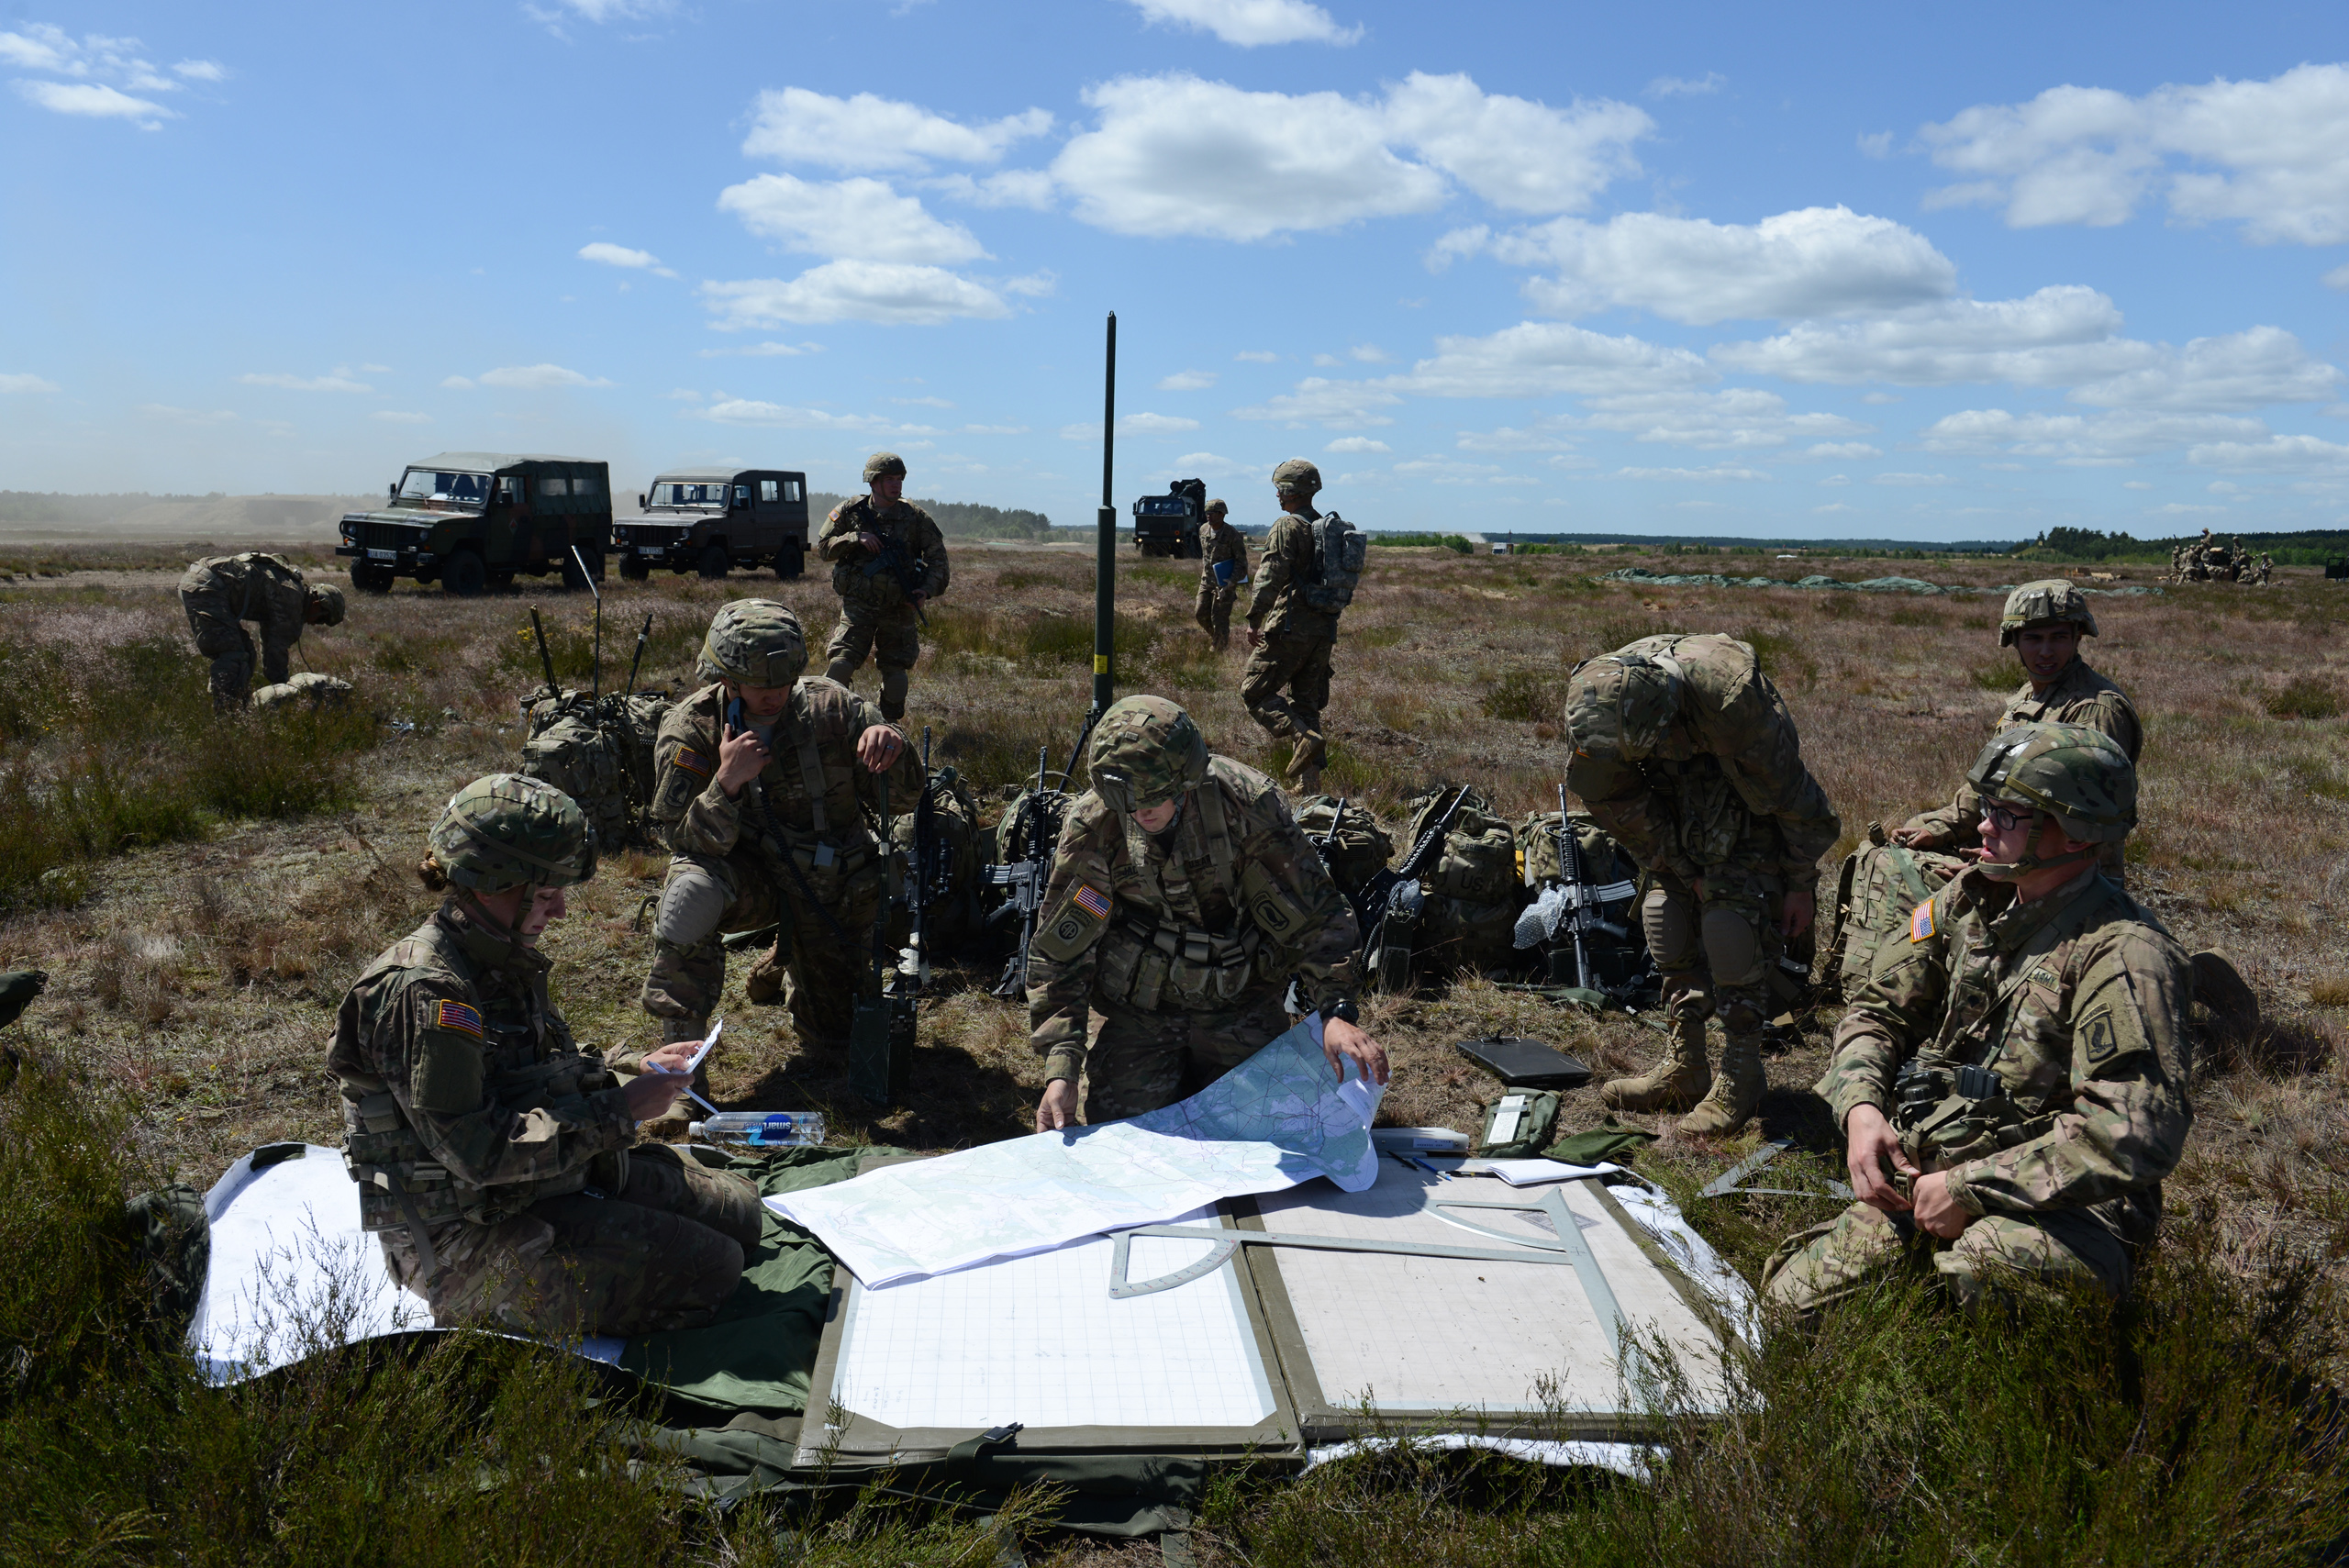 American soldiers with the Fourth of the 319th Airborne Field Artillery Regiment of the 173rd Infantry Brigade Combat Team examine their maps and communications following an airdrop from a C-17 aircraft that took off from Nuremberg, Germany and dropped at the Drawsko Pomorskie Training Area in Poland on June 15, 2015.